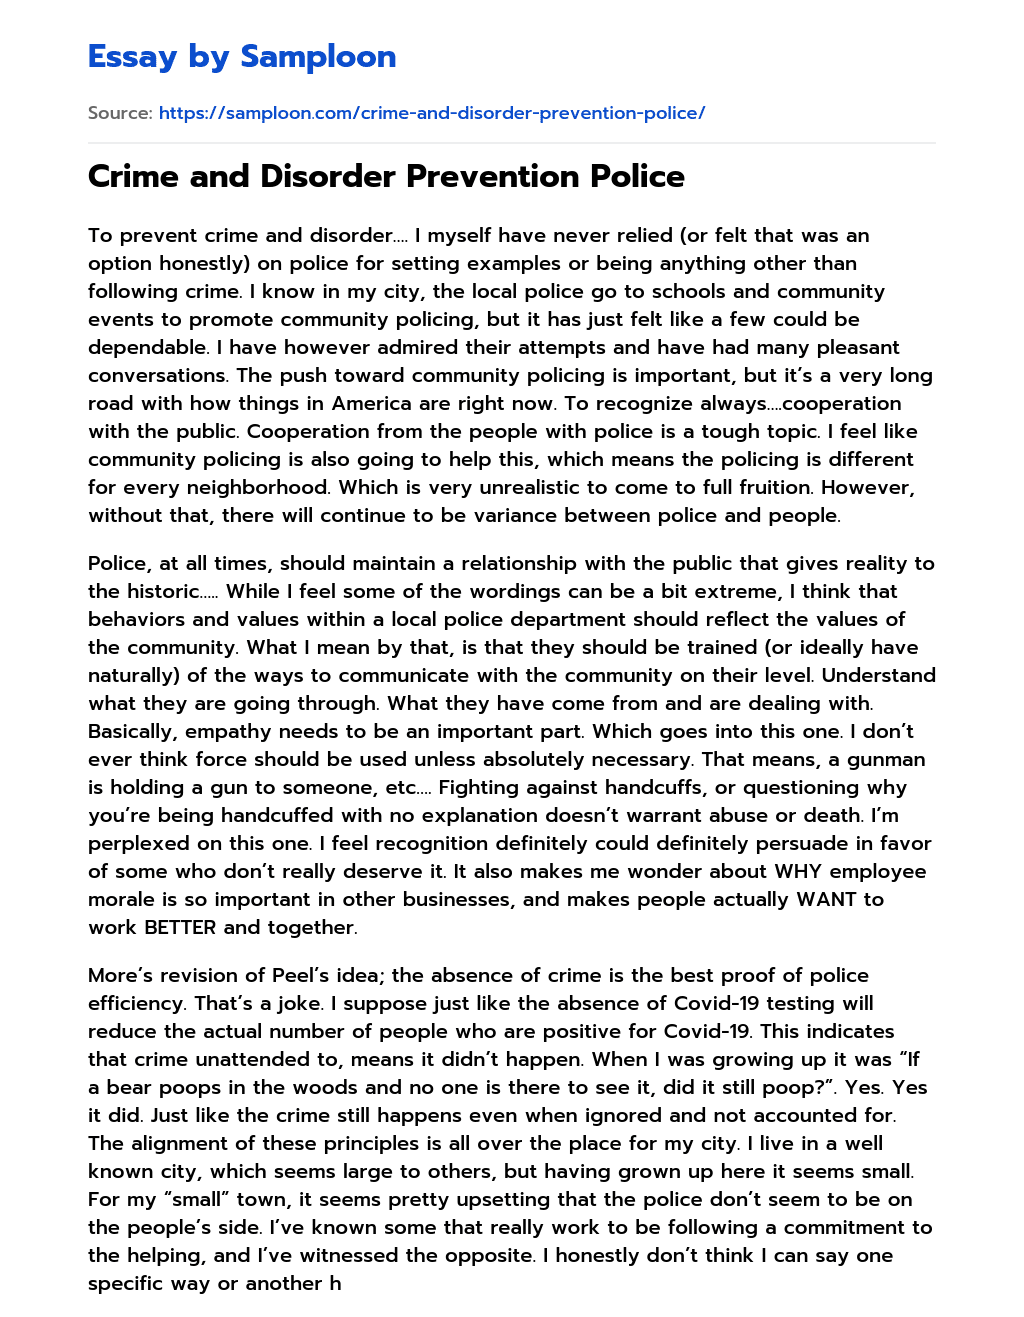 Crime and Disorder Prevention Police essay